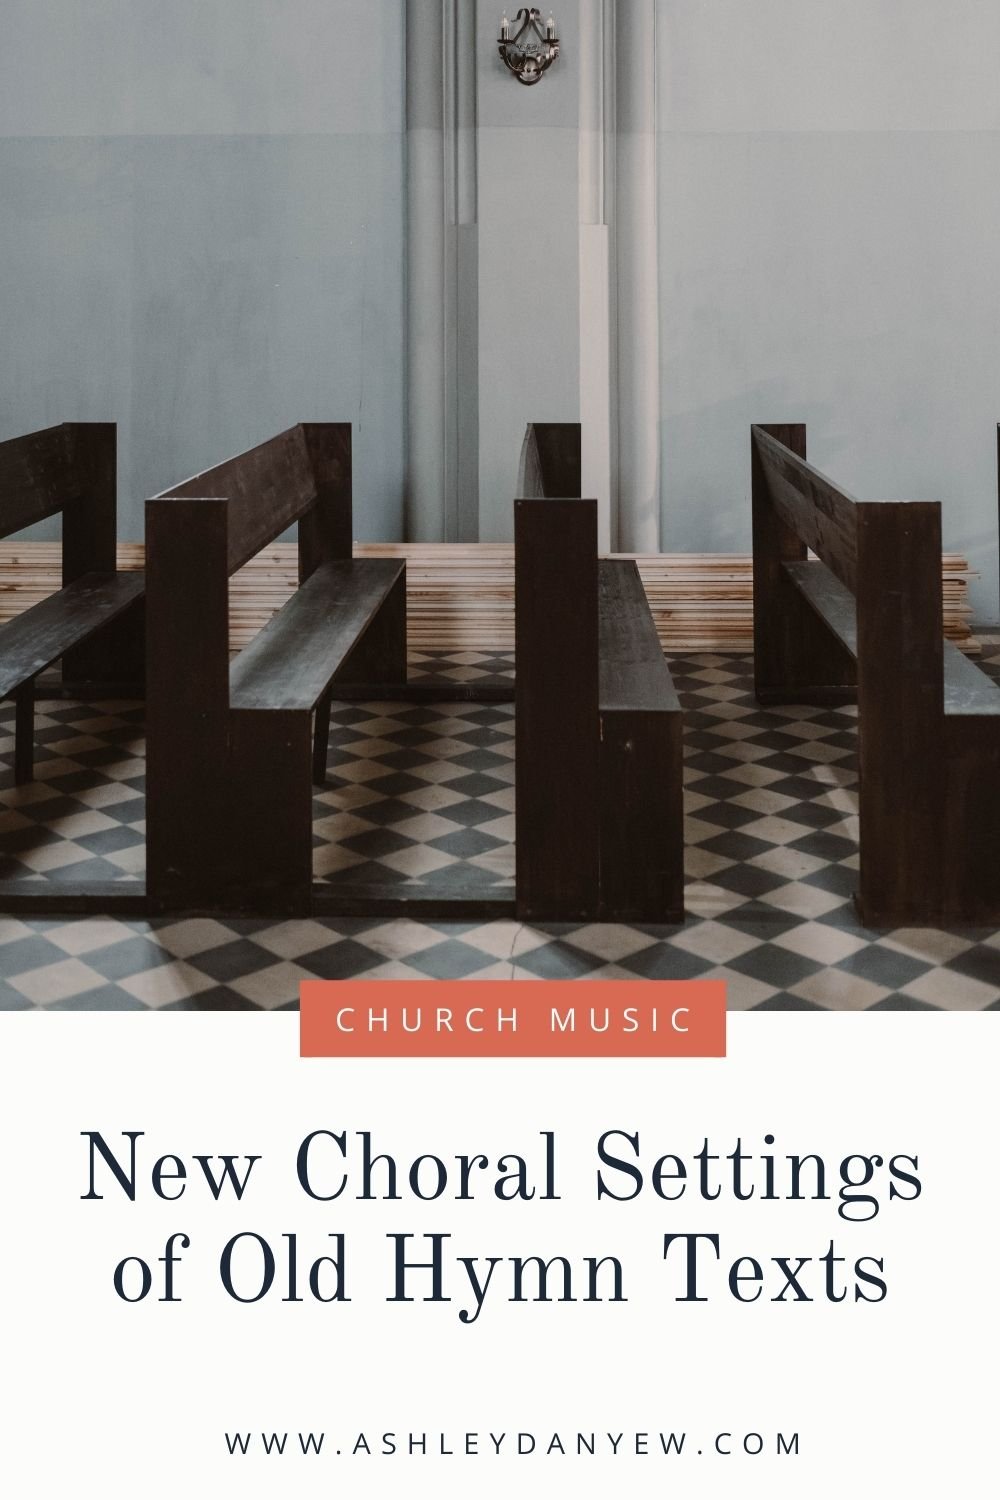 New Choral Settings of Old Hymn Texts